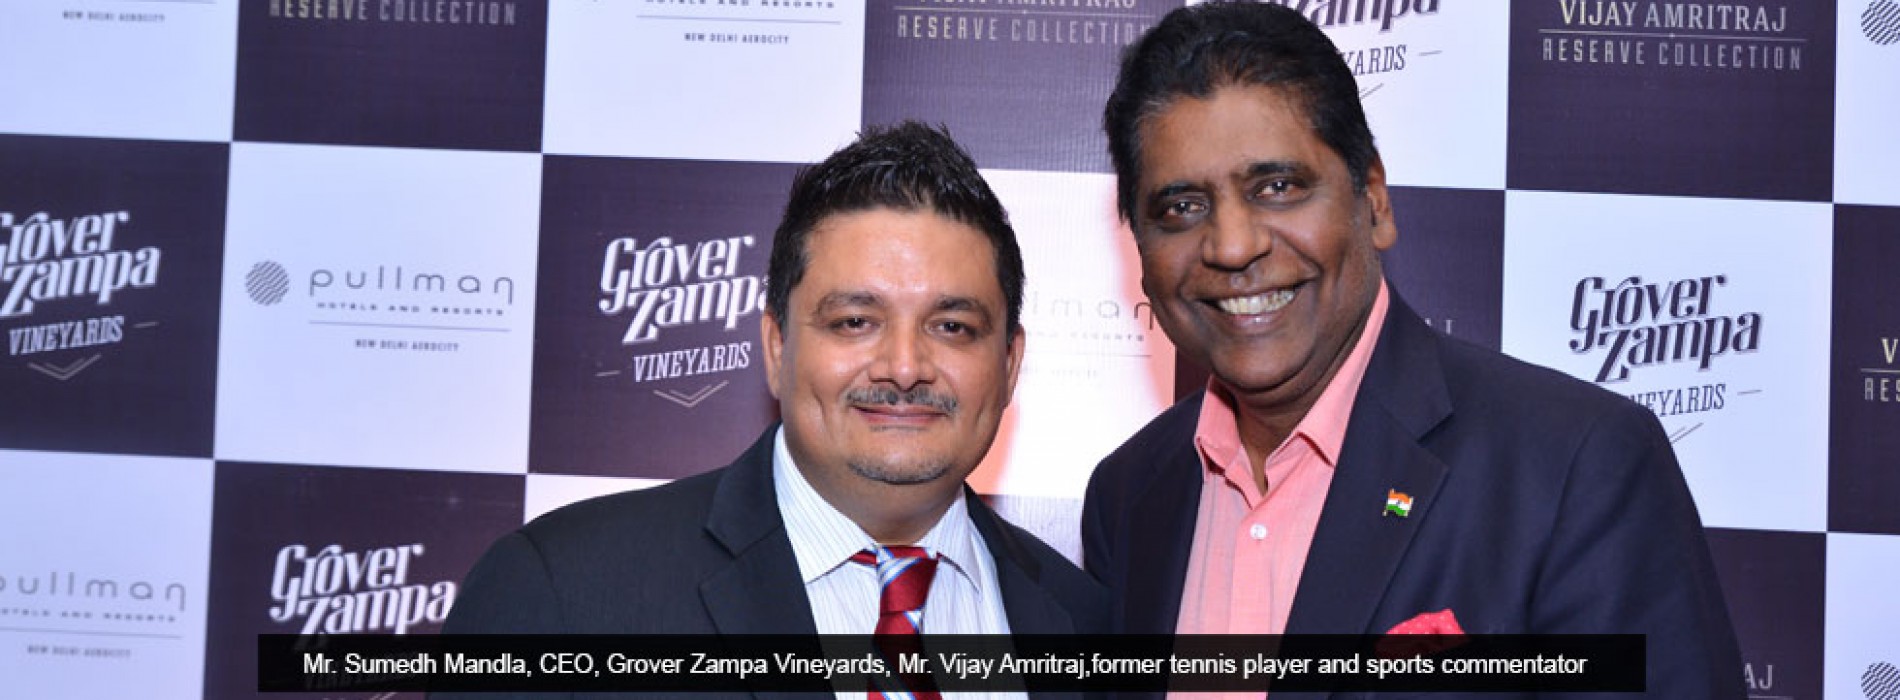 Grover Zampa Vineyards hosted an event at Pullman Hotels & Resorts